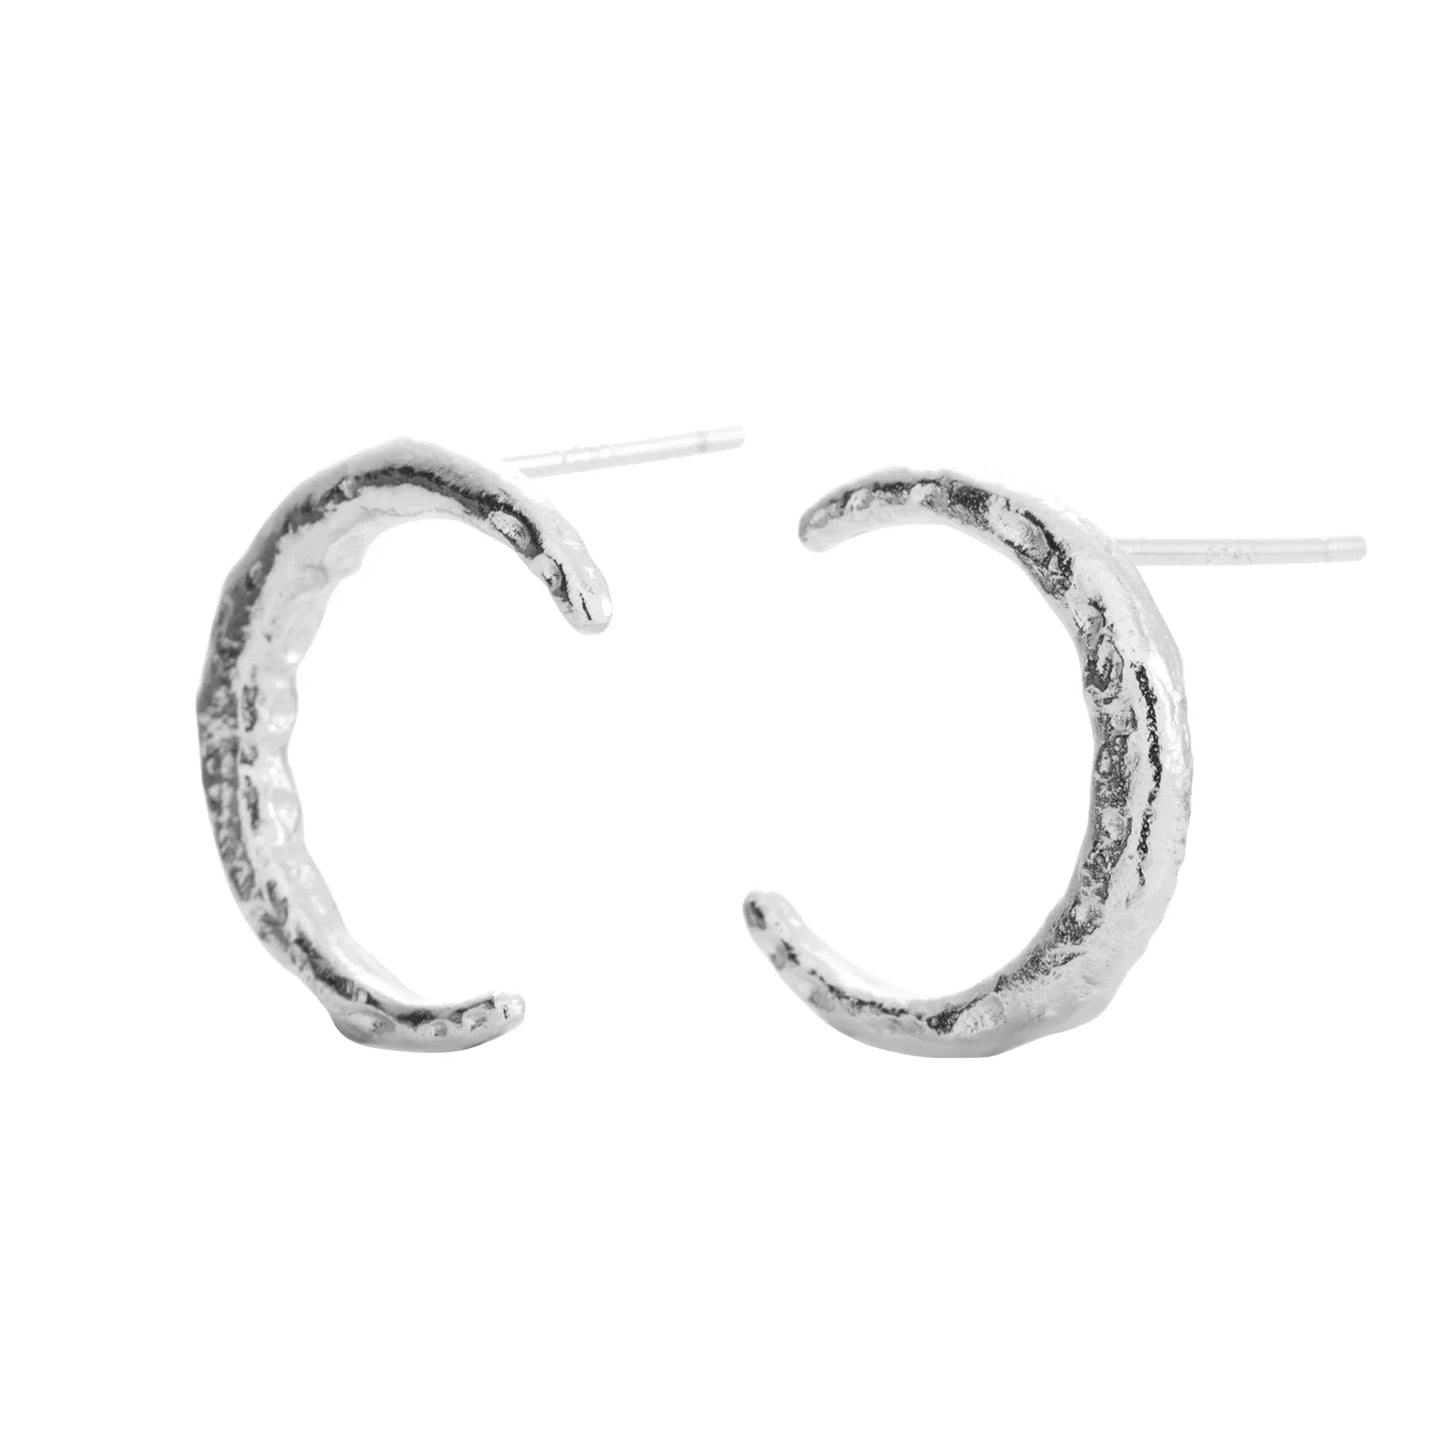 Stud Earrings LUNA - Silver: Recycled silver earrings, hypoallergenic, elegant design. Made of 925 sterling silver, rhodium plated, 15 x 13 mm, lightweight. Care instructions included.